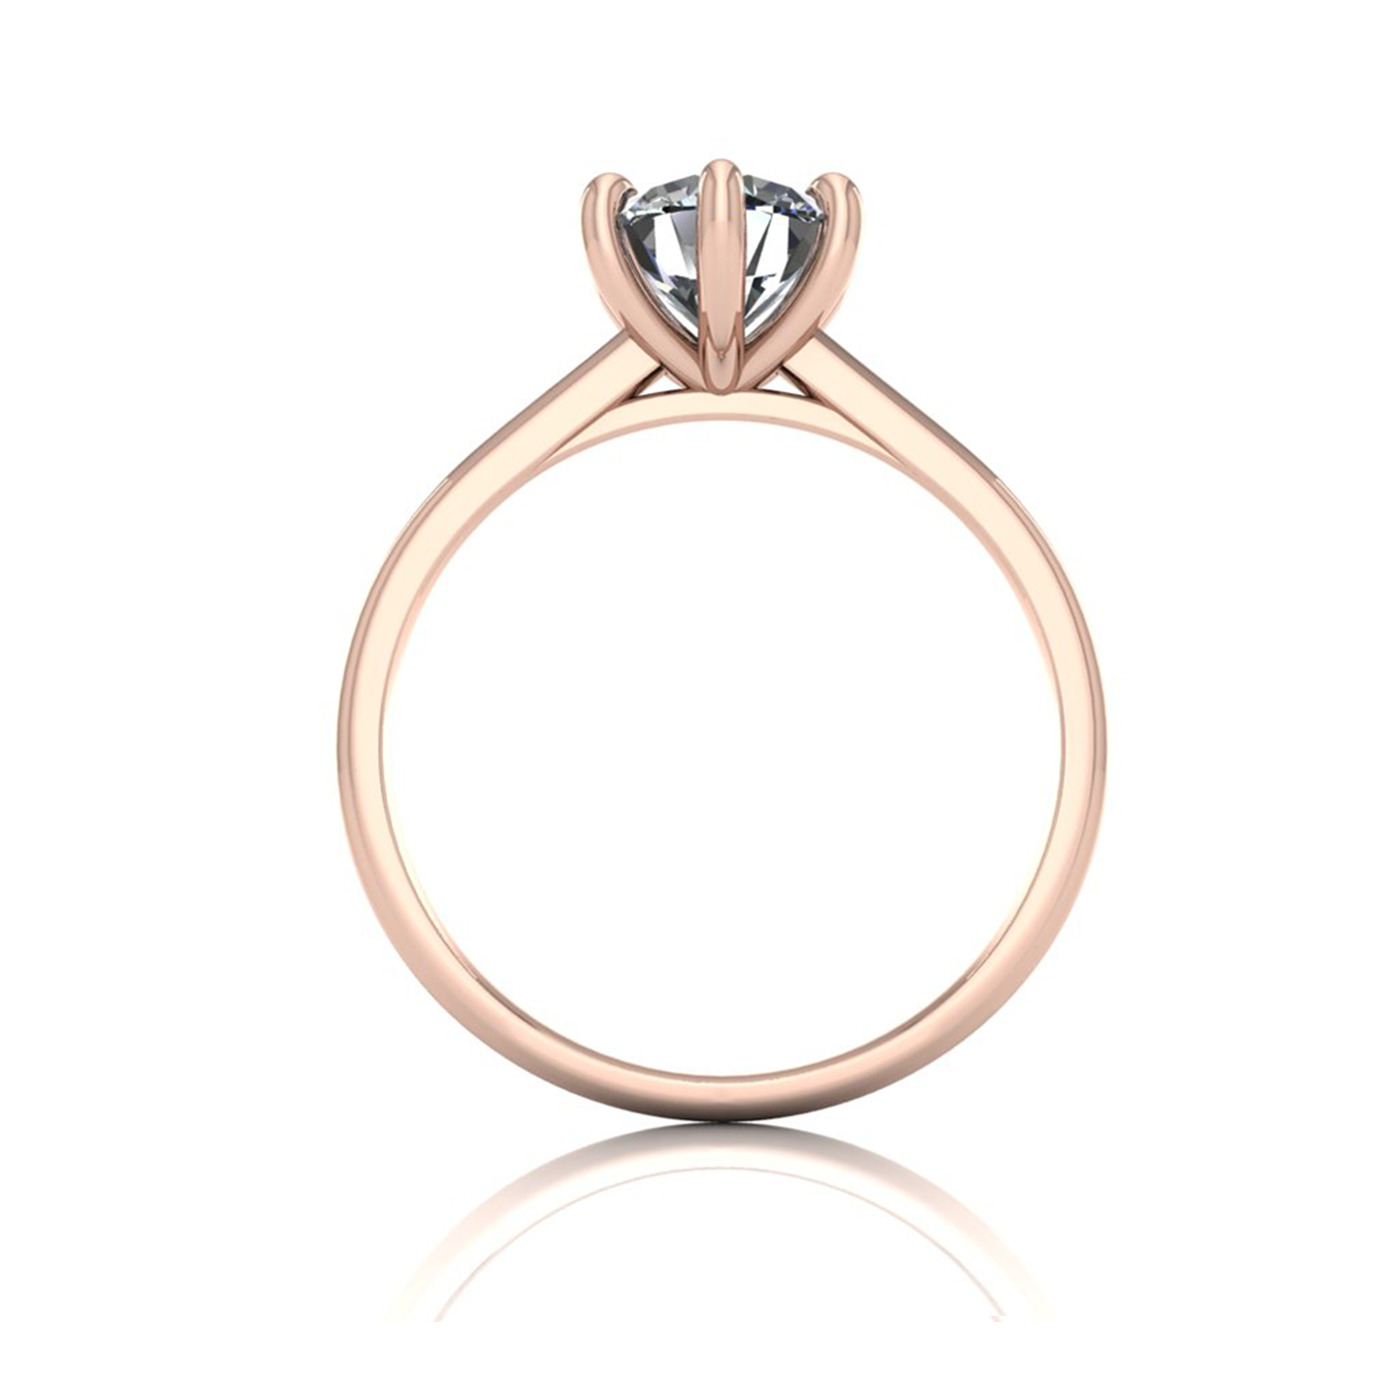 18k rose gold 1,00 ct 6 prongs solitaire round cut diamond engagement ring with whisper thin band